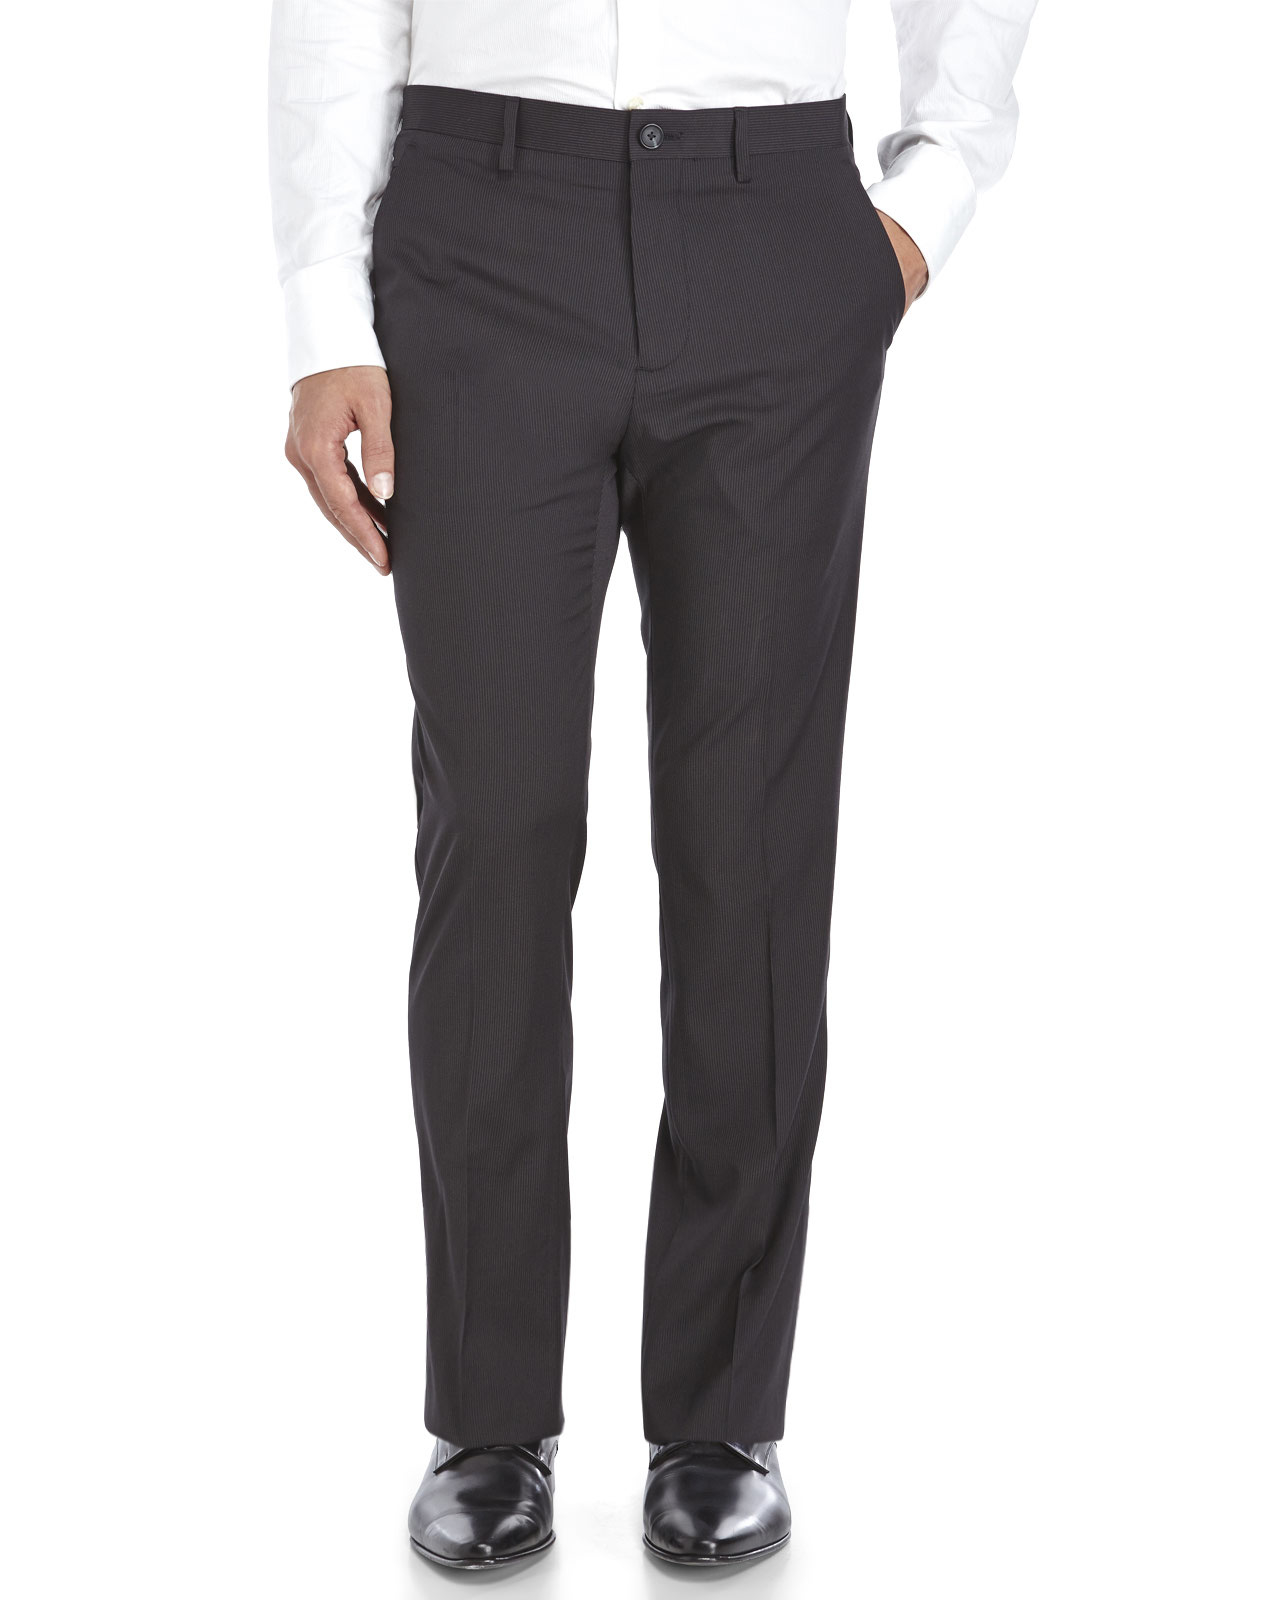 Lyst - English Laundry Finchley Striped Pants in Black for Men